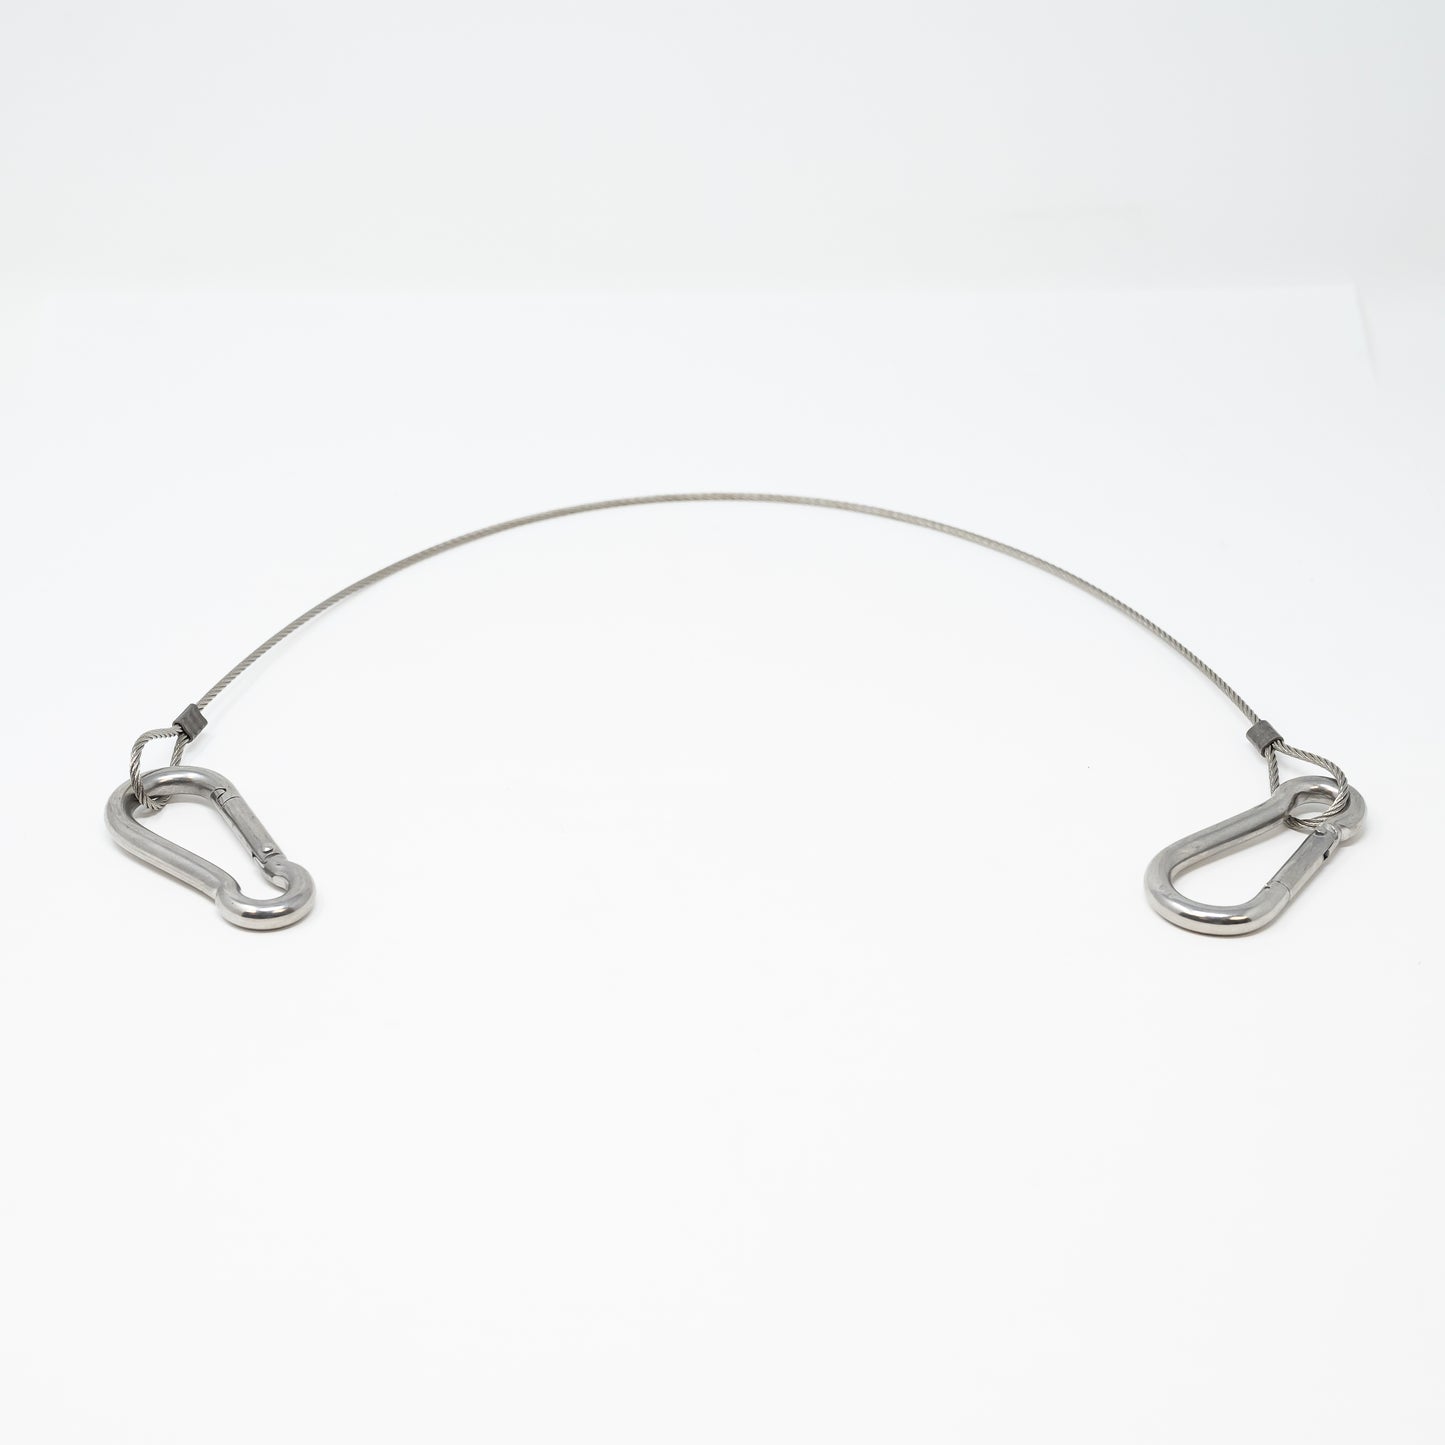 Stainless steel harness with clips